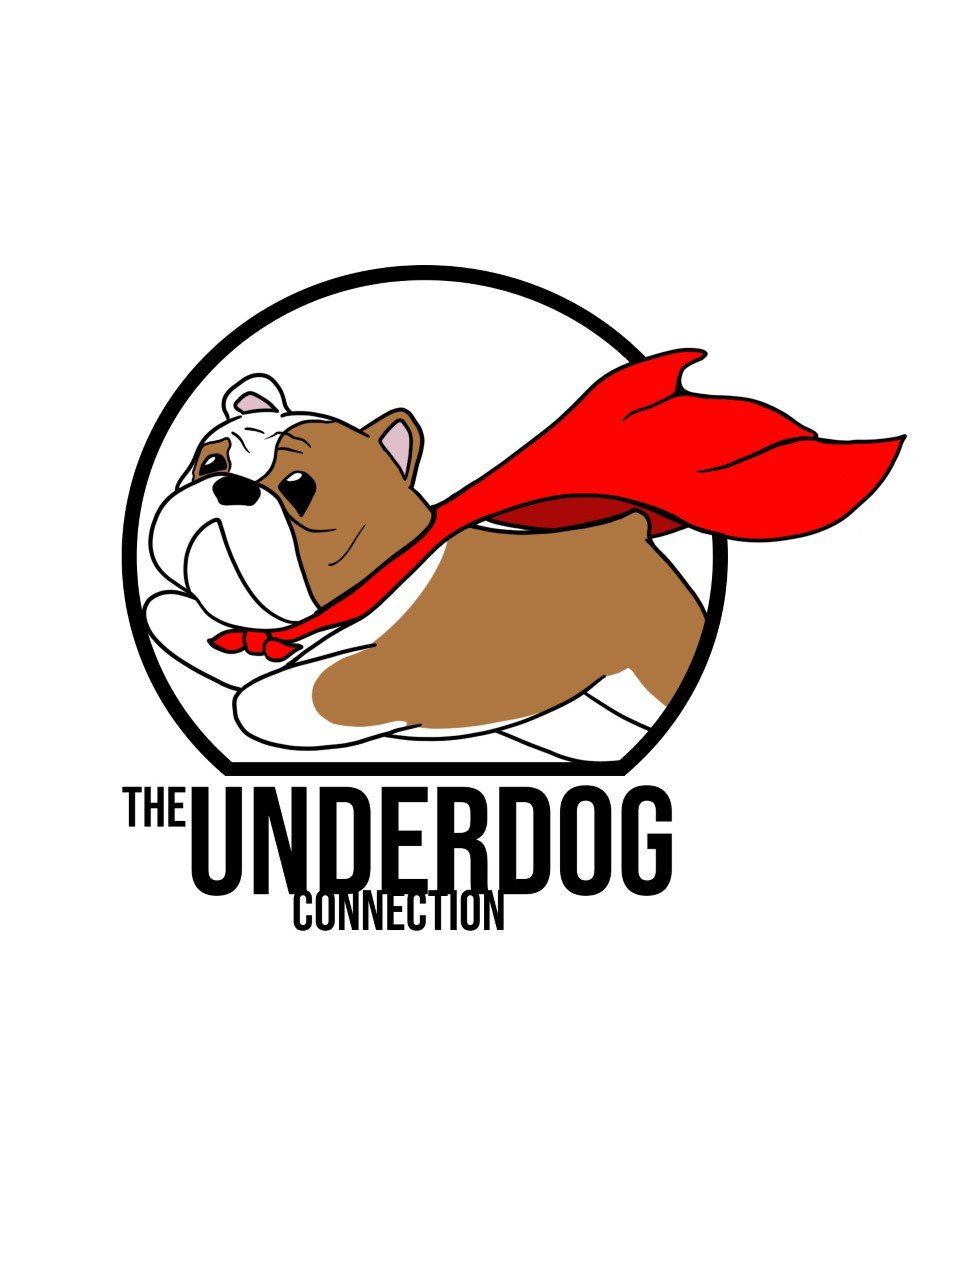 The Underdog Connection